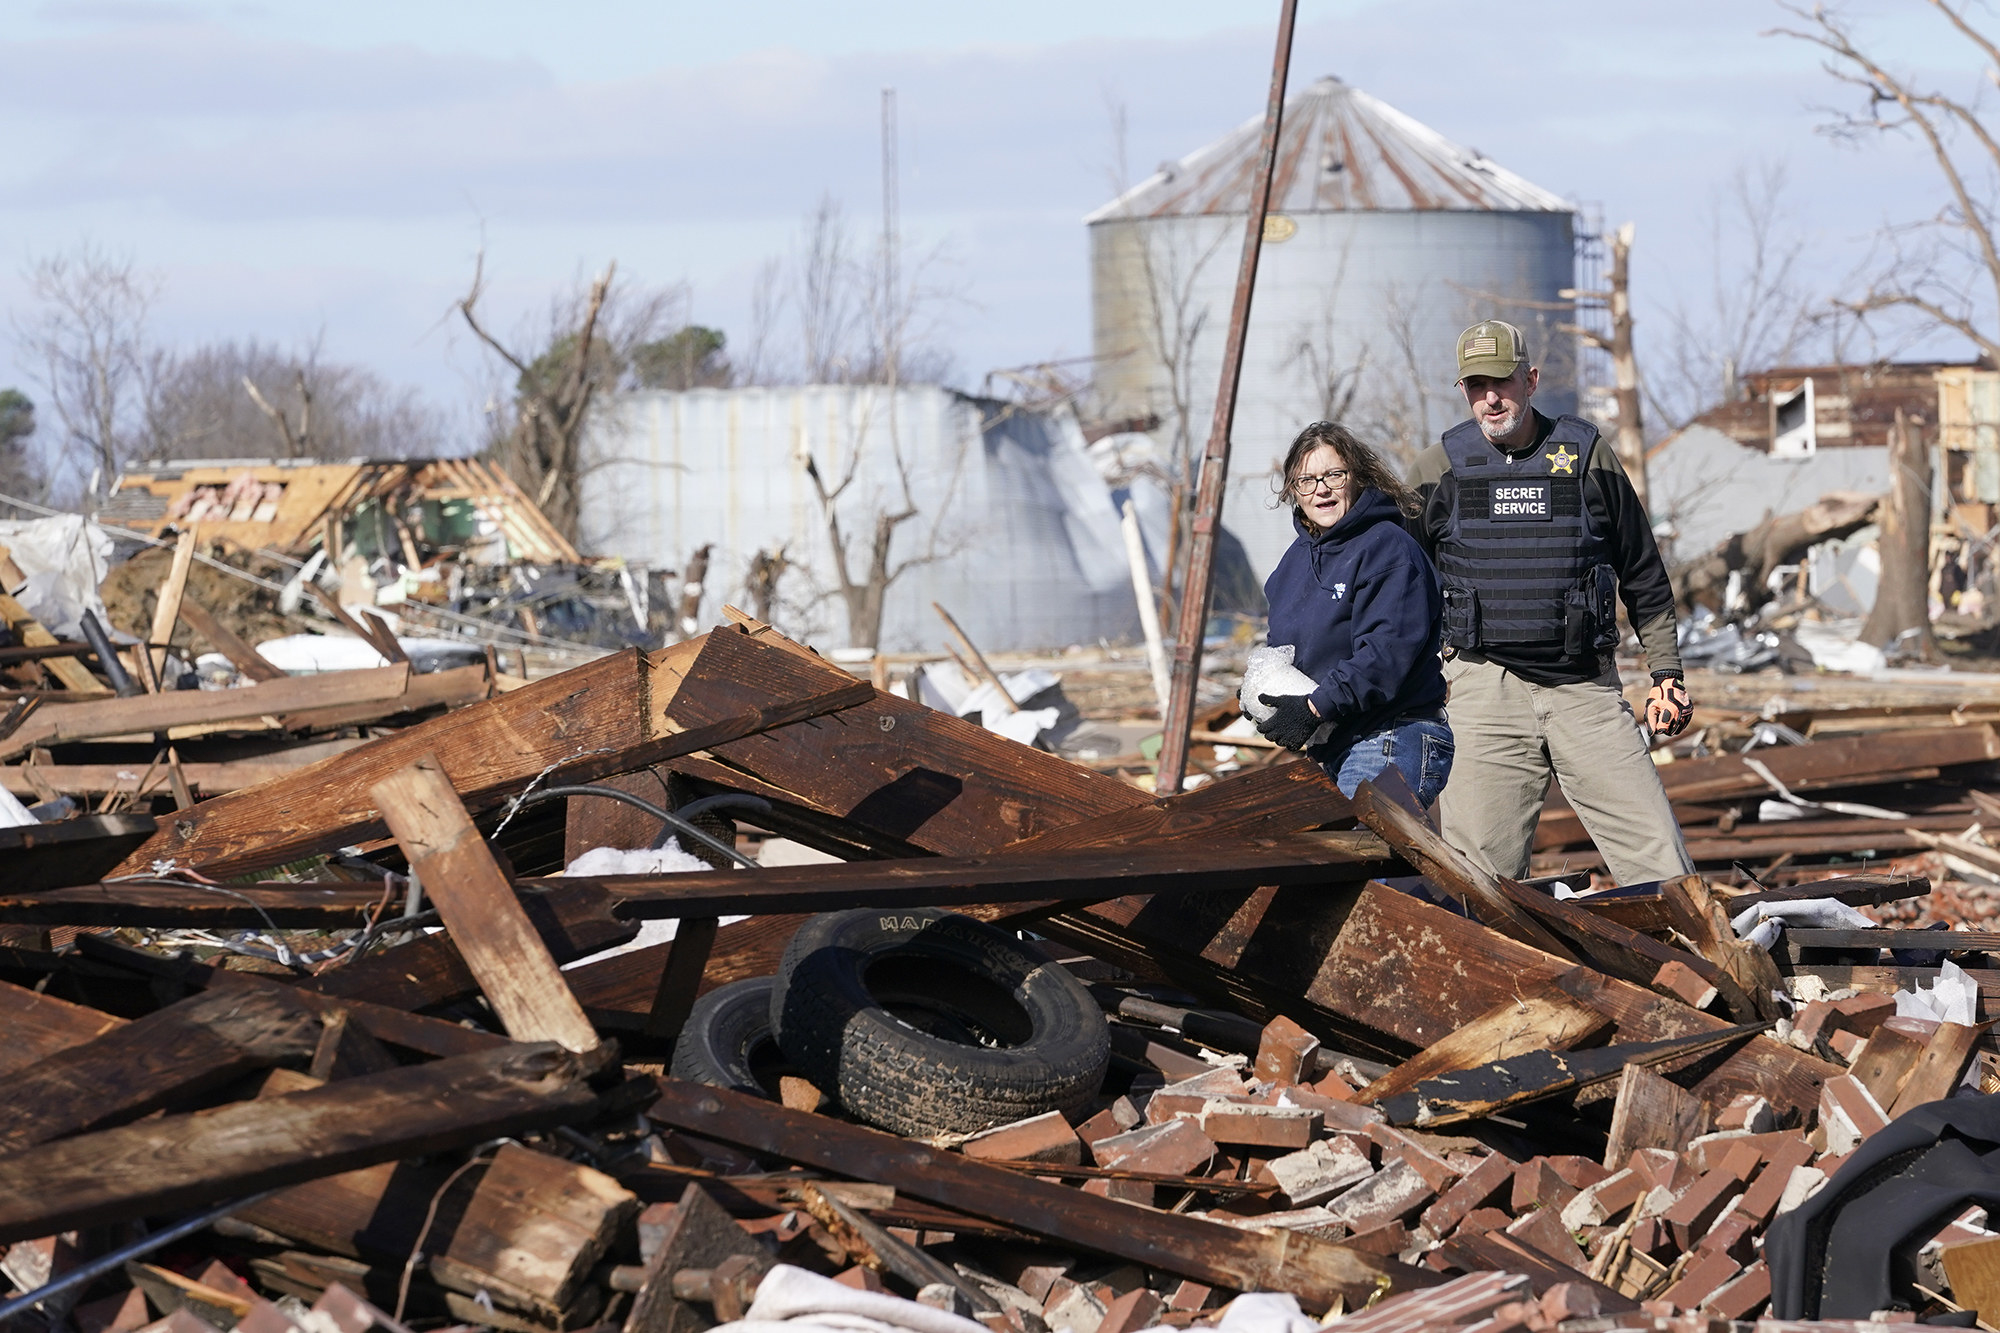 A man and a woman stand amid a scene of rubble